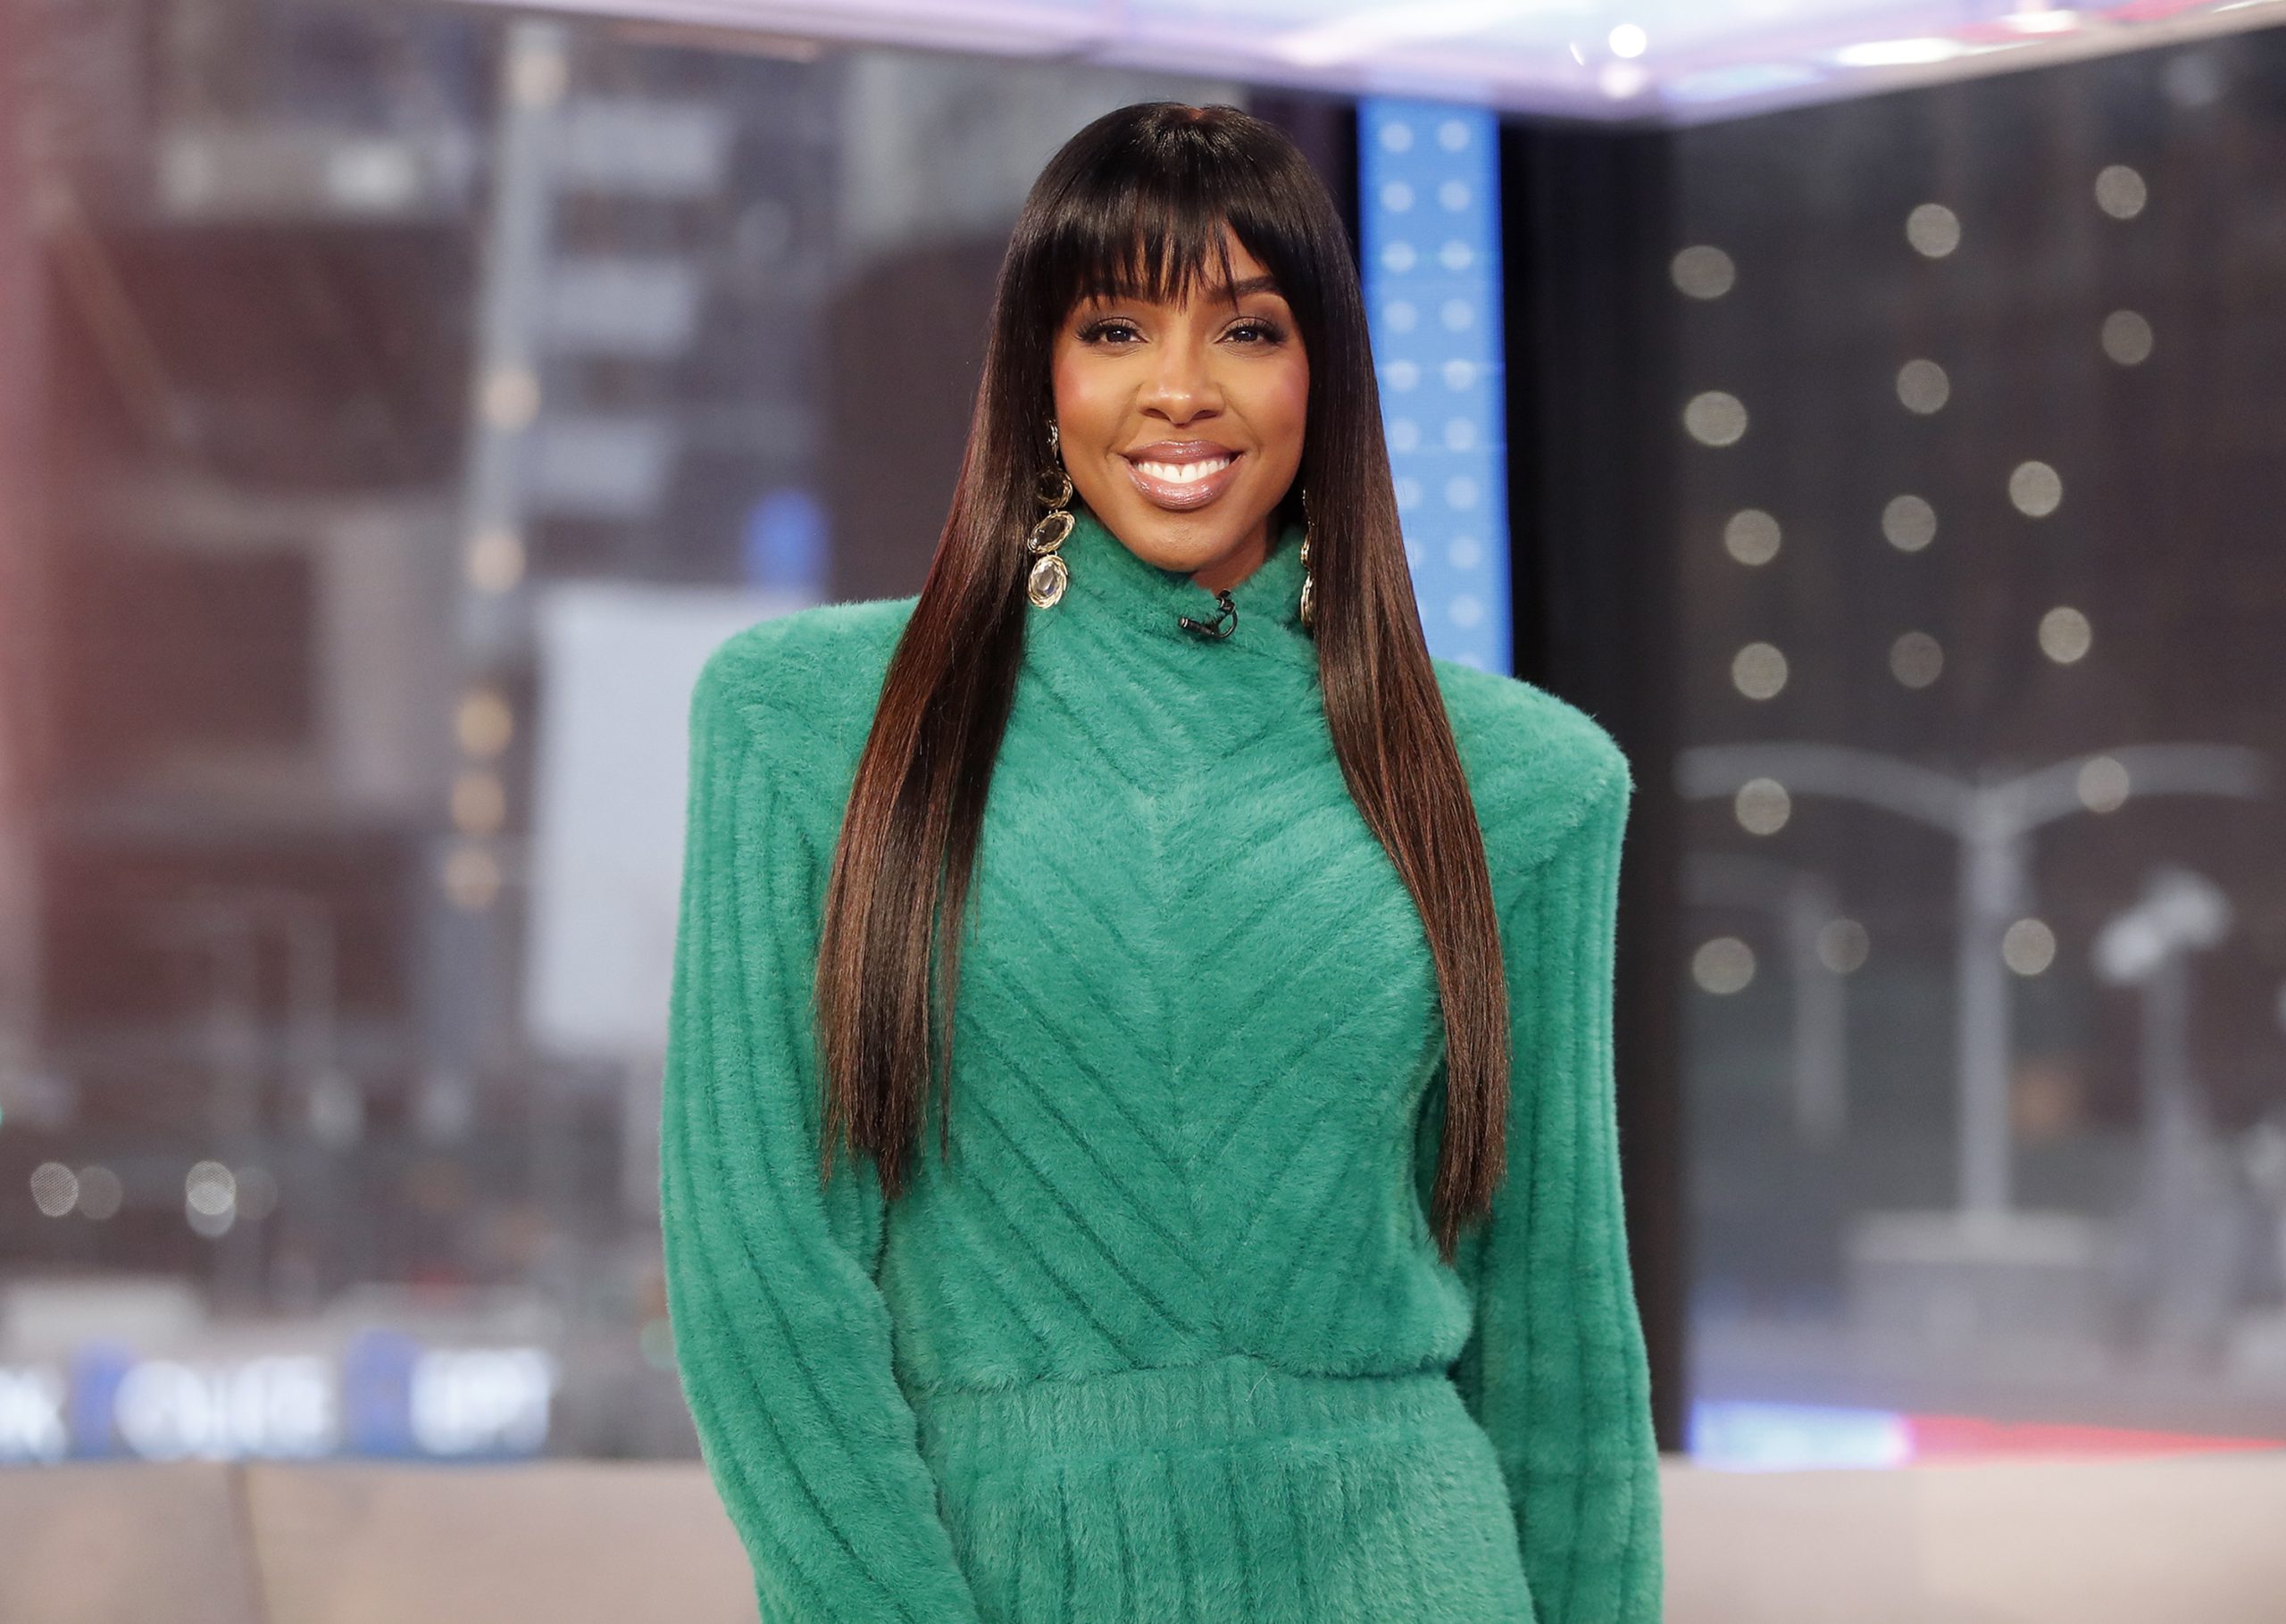 In Case You Missed It: Kelly Rowland On ‘Good Morning America’